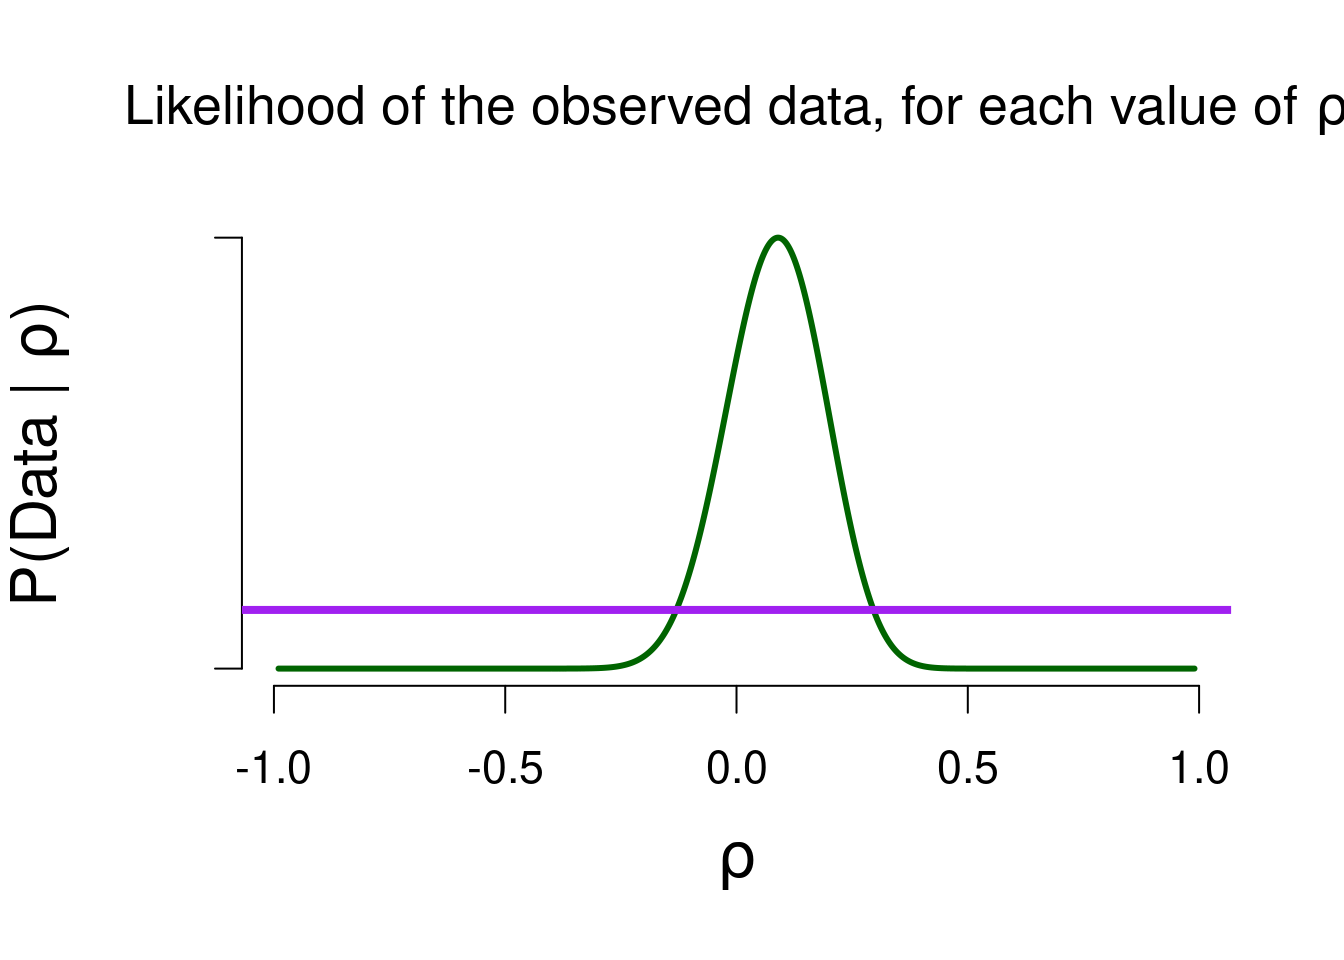 The likelihood of the observed data, for various values of rho. The higher the likelihood, the better that value predicted the data. The likelihood is the highest for the observed correlation (0.1).